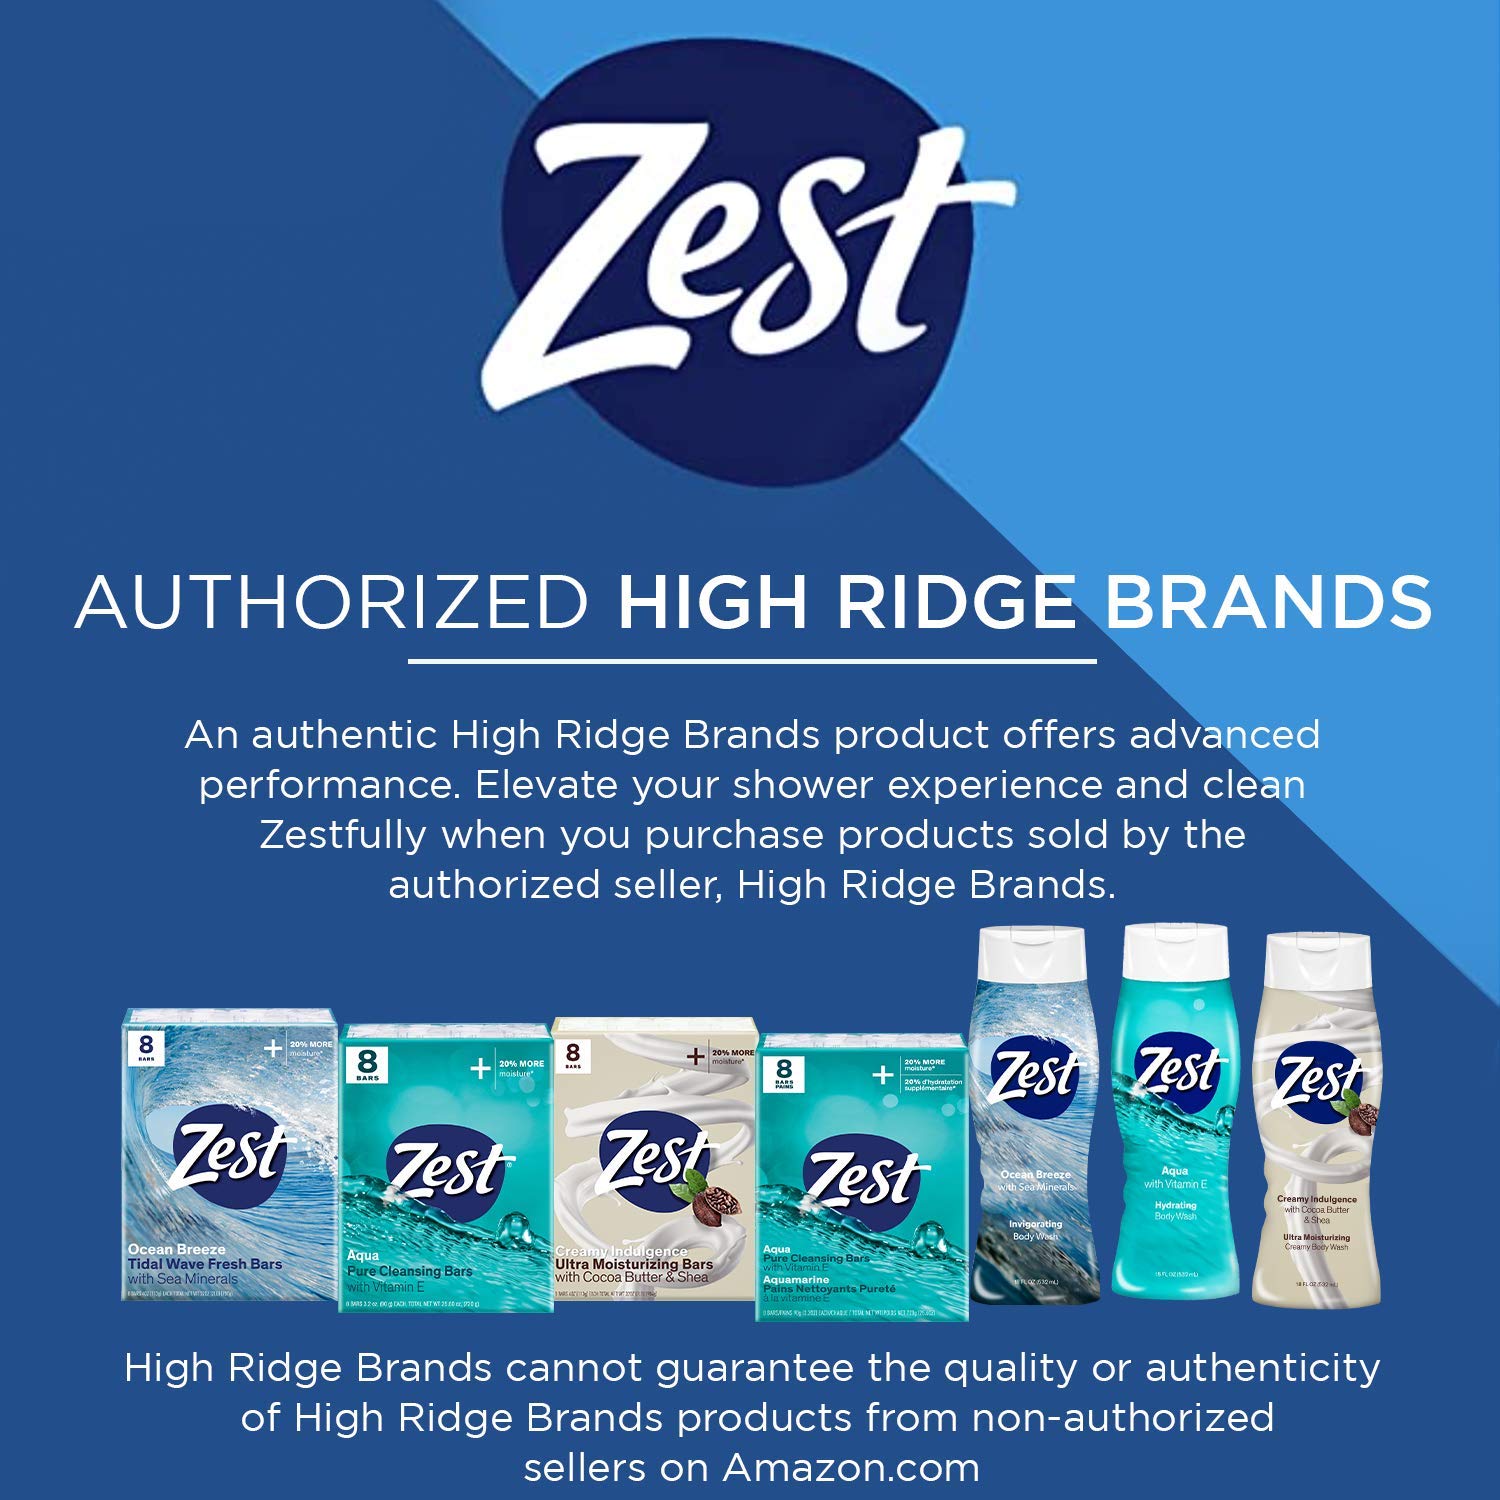 Zest Ocean Breeze Bar Soap - 8 Bars - Enriched With Sea Minerals - Rich Lathering Bars Leave Your Body Feeling Smooth And Moisturized with an Invigorating Scent